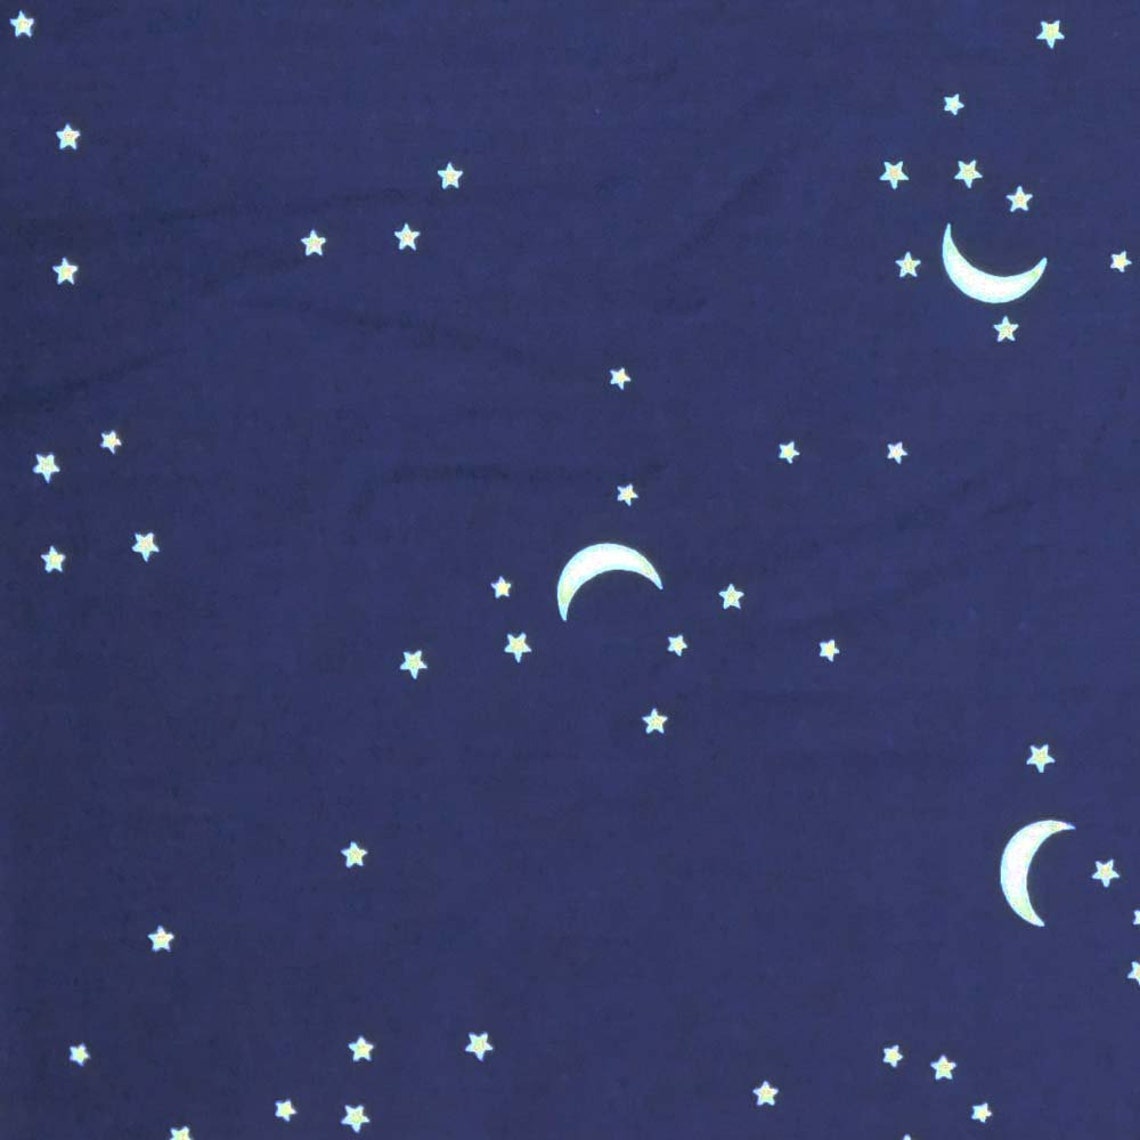 Quilting Patchwork Fabric Navy Moons And Stars Allover 50x55cm | Etsy